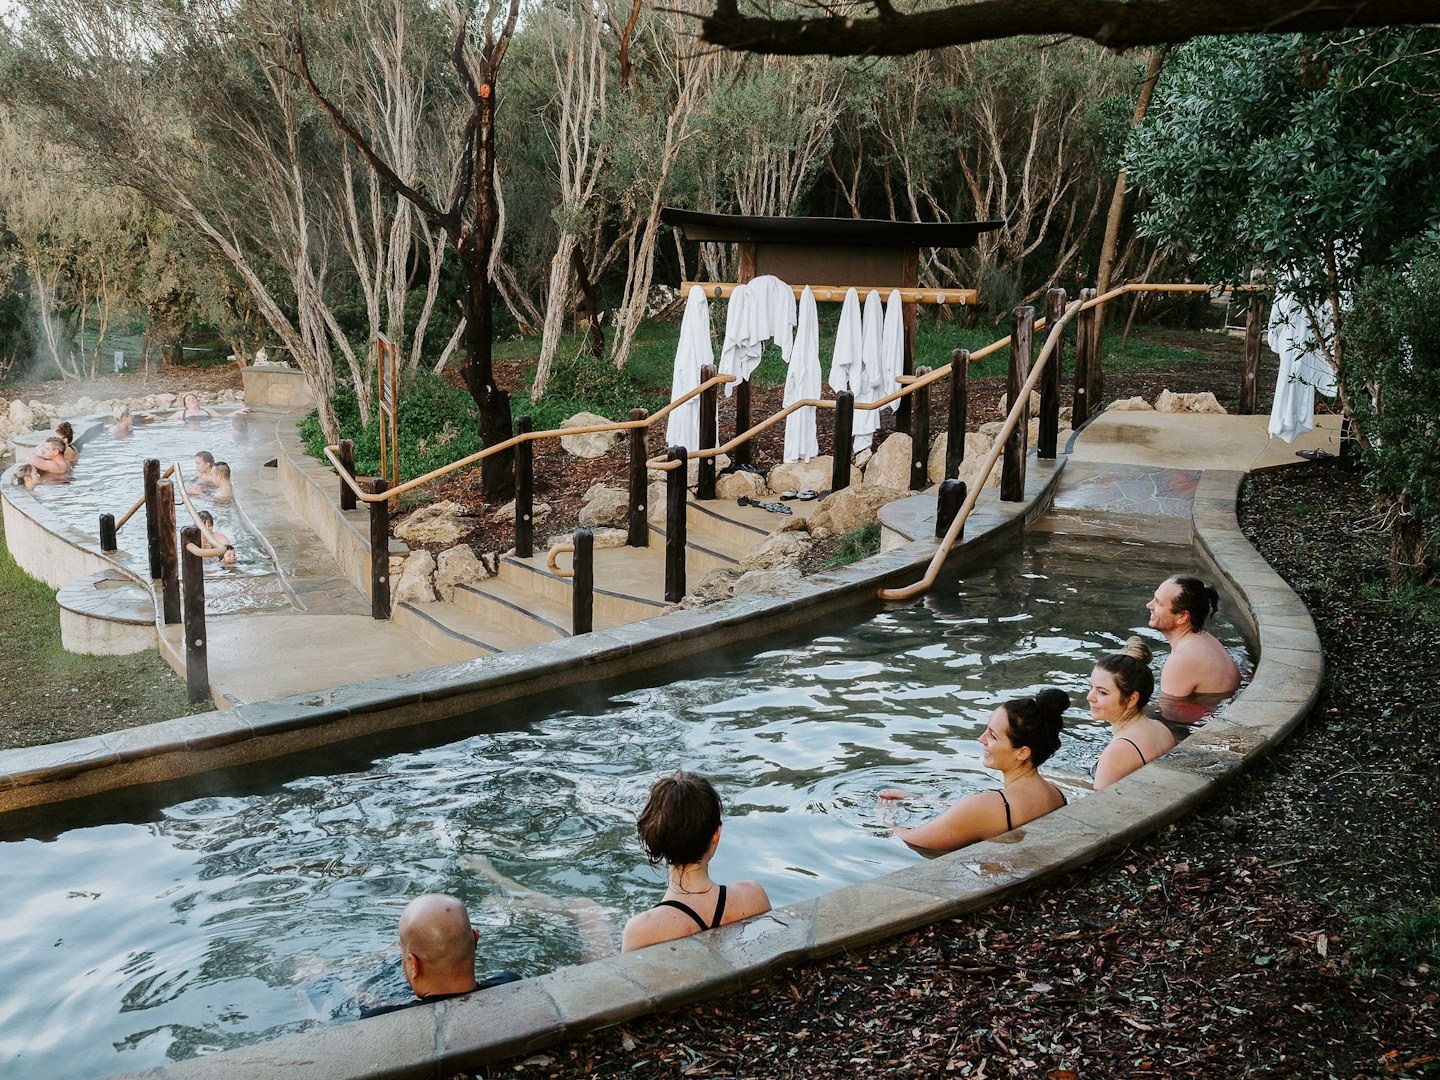 group of friends sitting in amphitheatre pool with trees and hanging bath robes in background